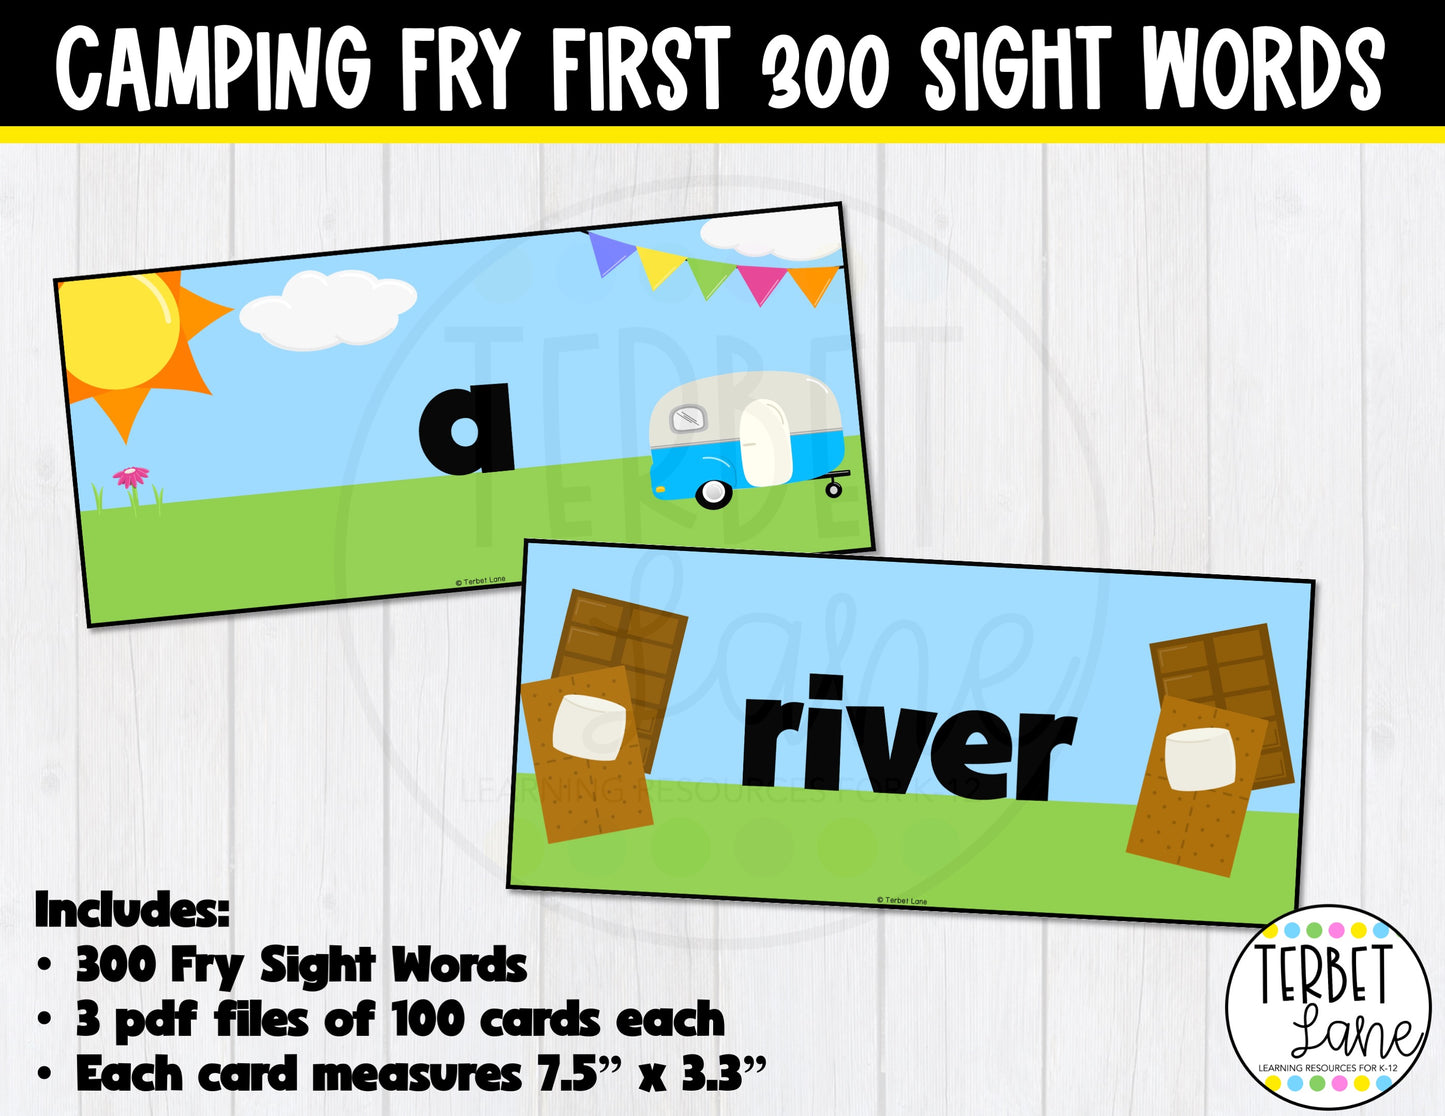 Camping Themed First 300 Fry Sight Word Cards